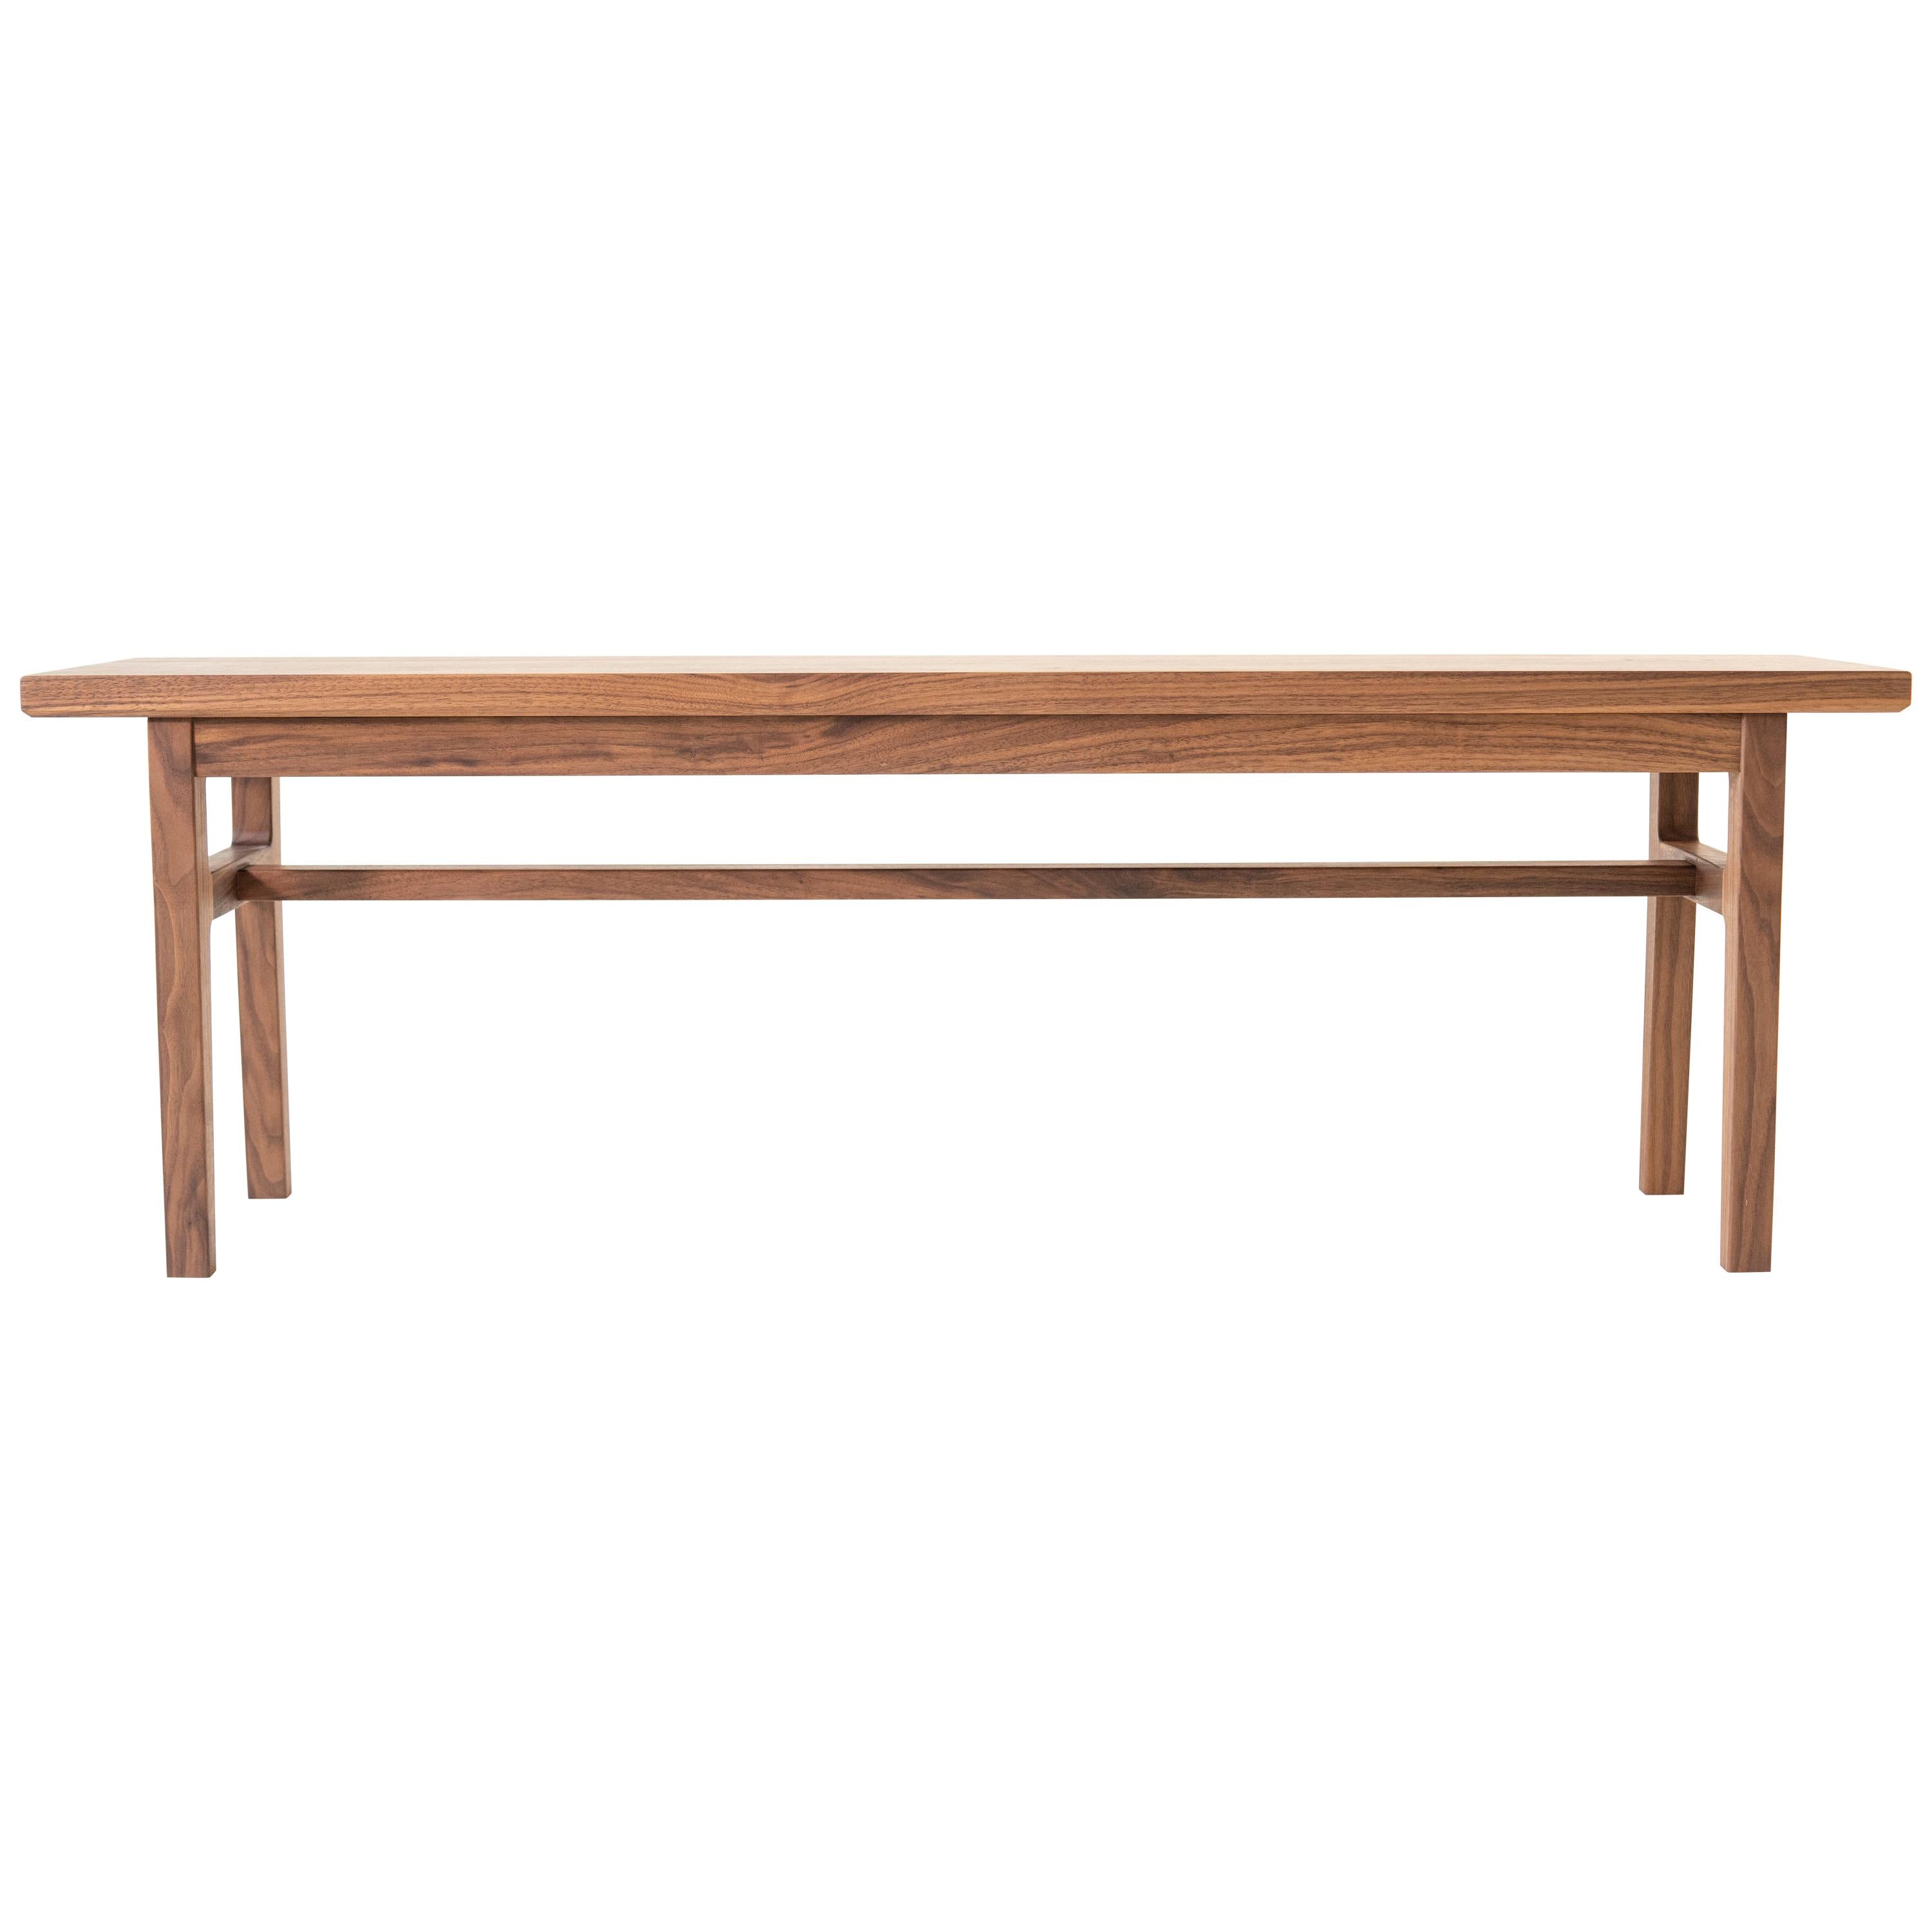 Laurel Bench, Modern Walnut Bench with Sculpted Joinery